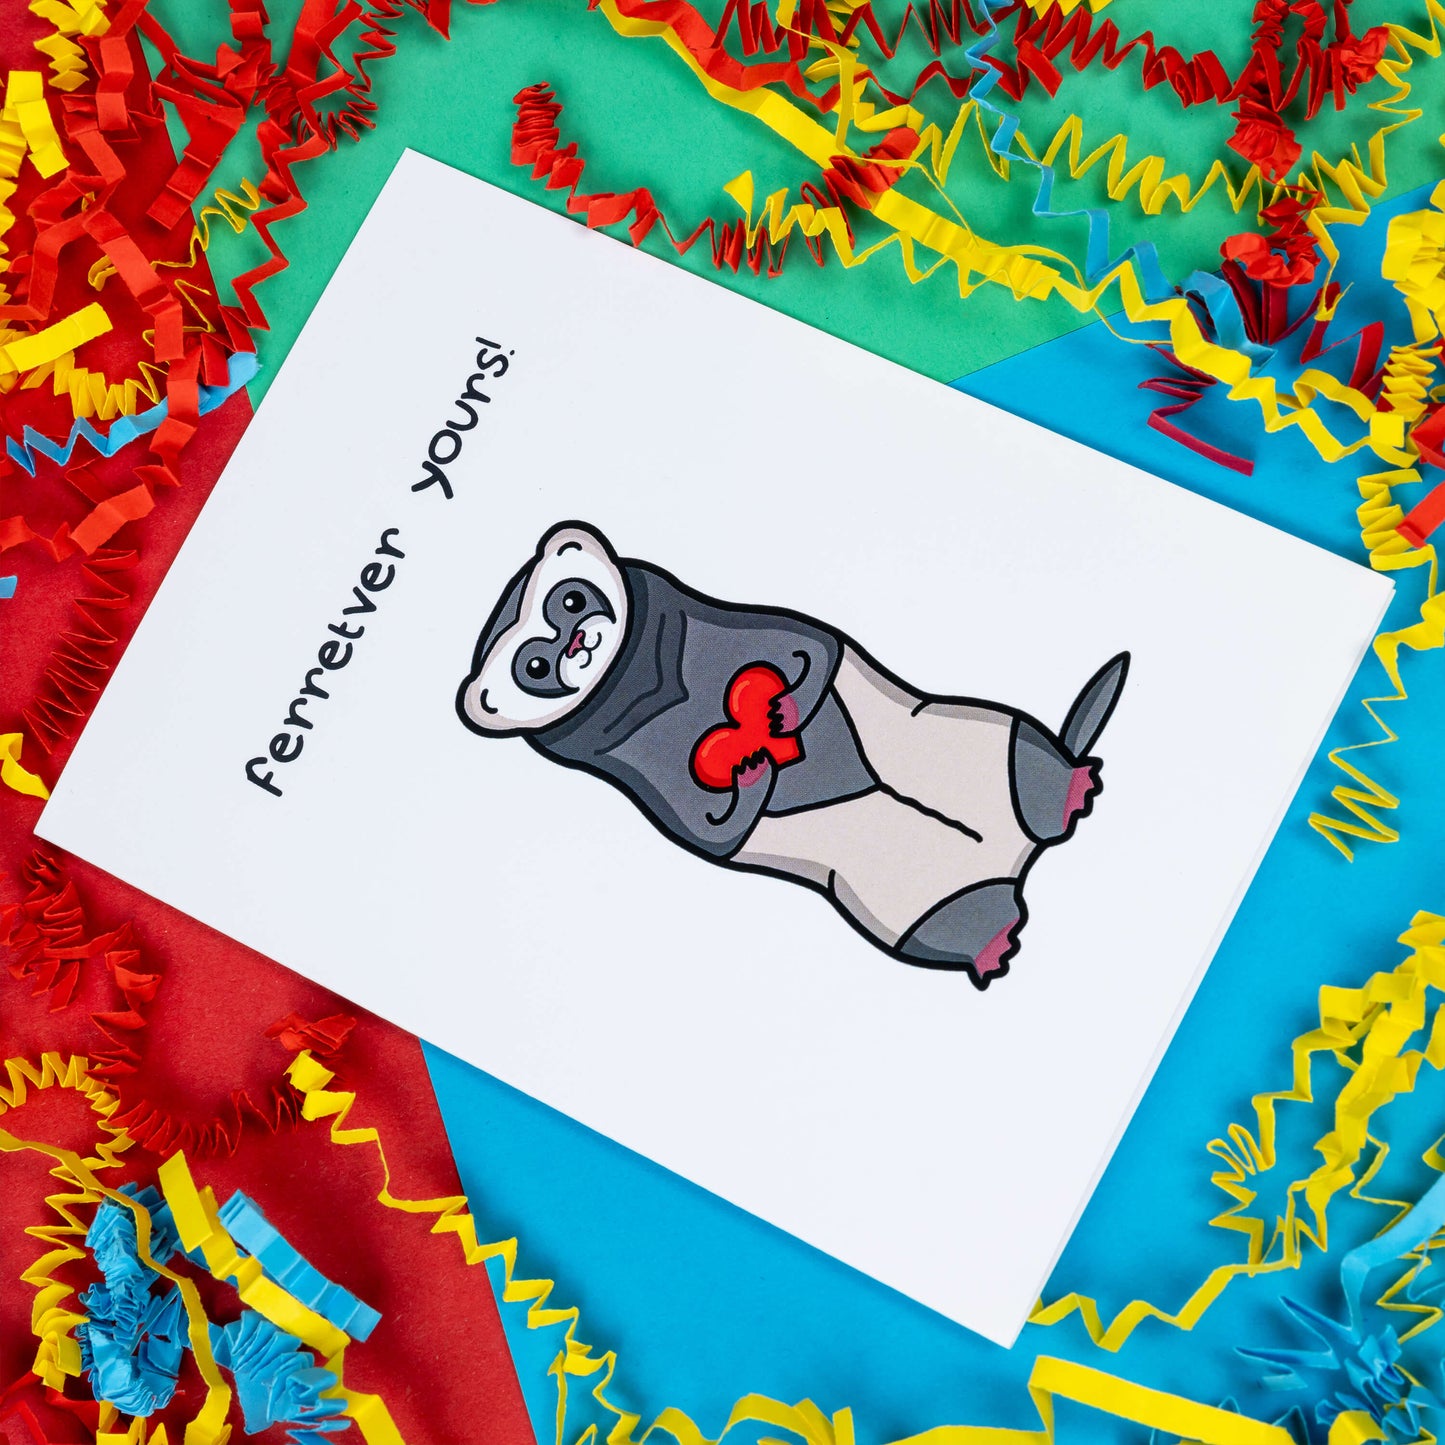 The Ferretver Yours Valentines Day Love Card on a red, blue and green background with red, yellow and blue crinkle card confetti. A white a6 greetings card with a drawing of a happy ferret holding a red heart saying ferreter yours on the front.